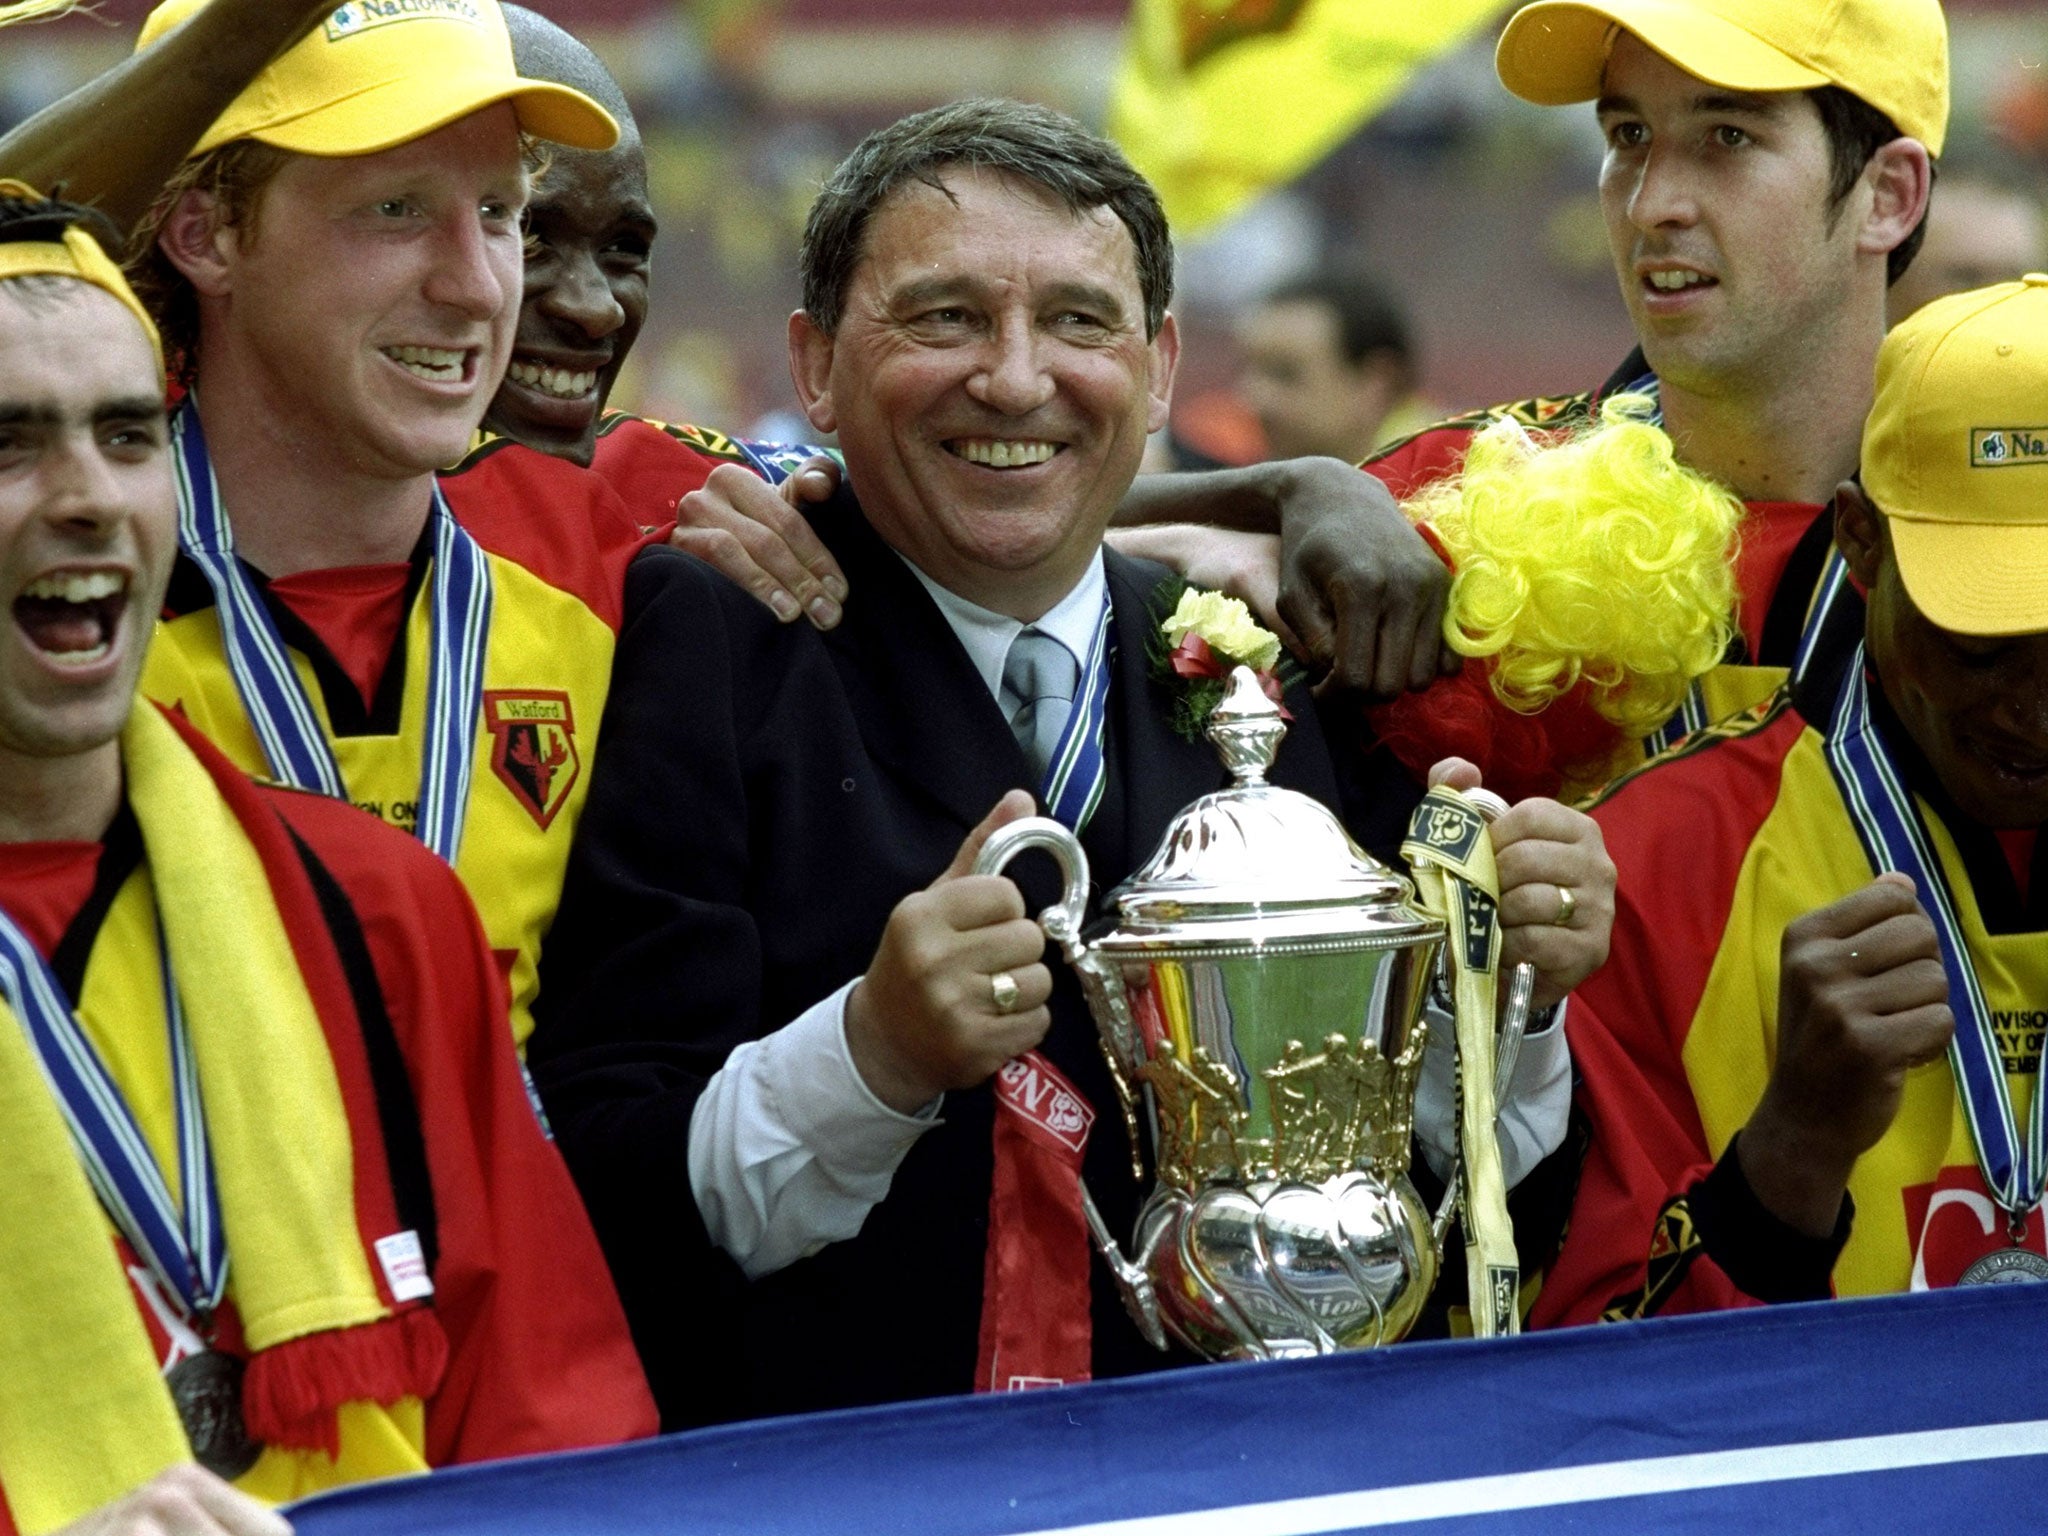 Watford players and Taylor celebrate victory after promotion to the old First Division, May 1999